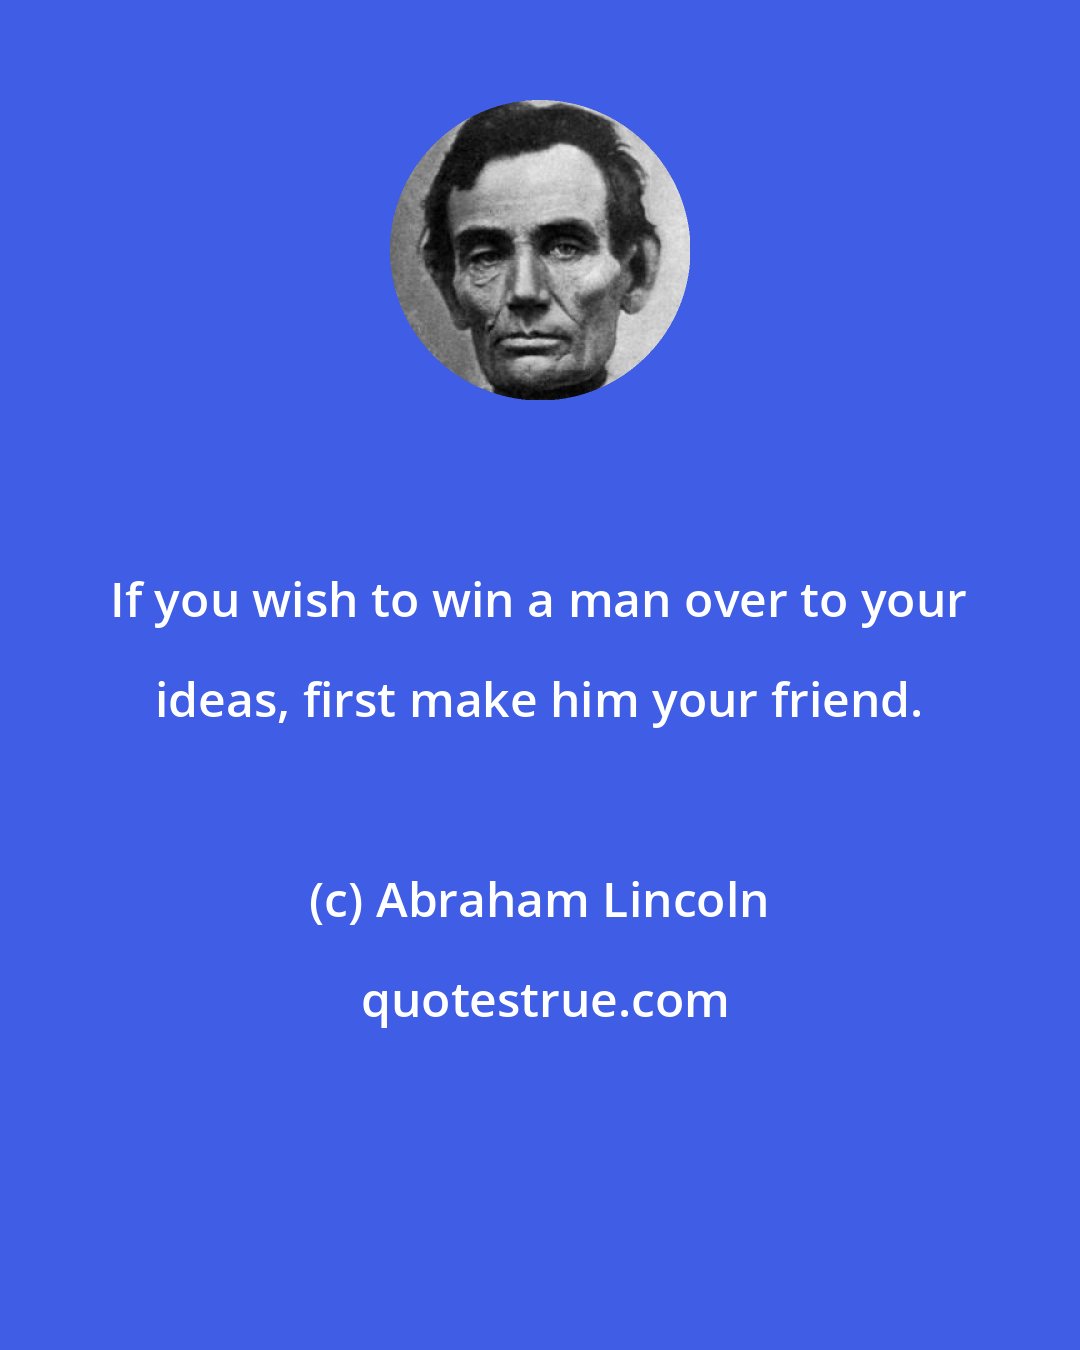 Abraham Lincoln: If you wish to win a man over to your ideas, first make him your friend.